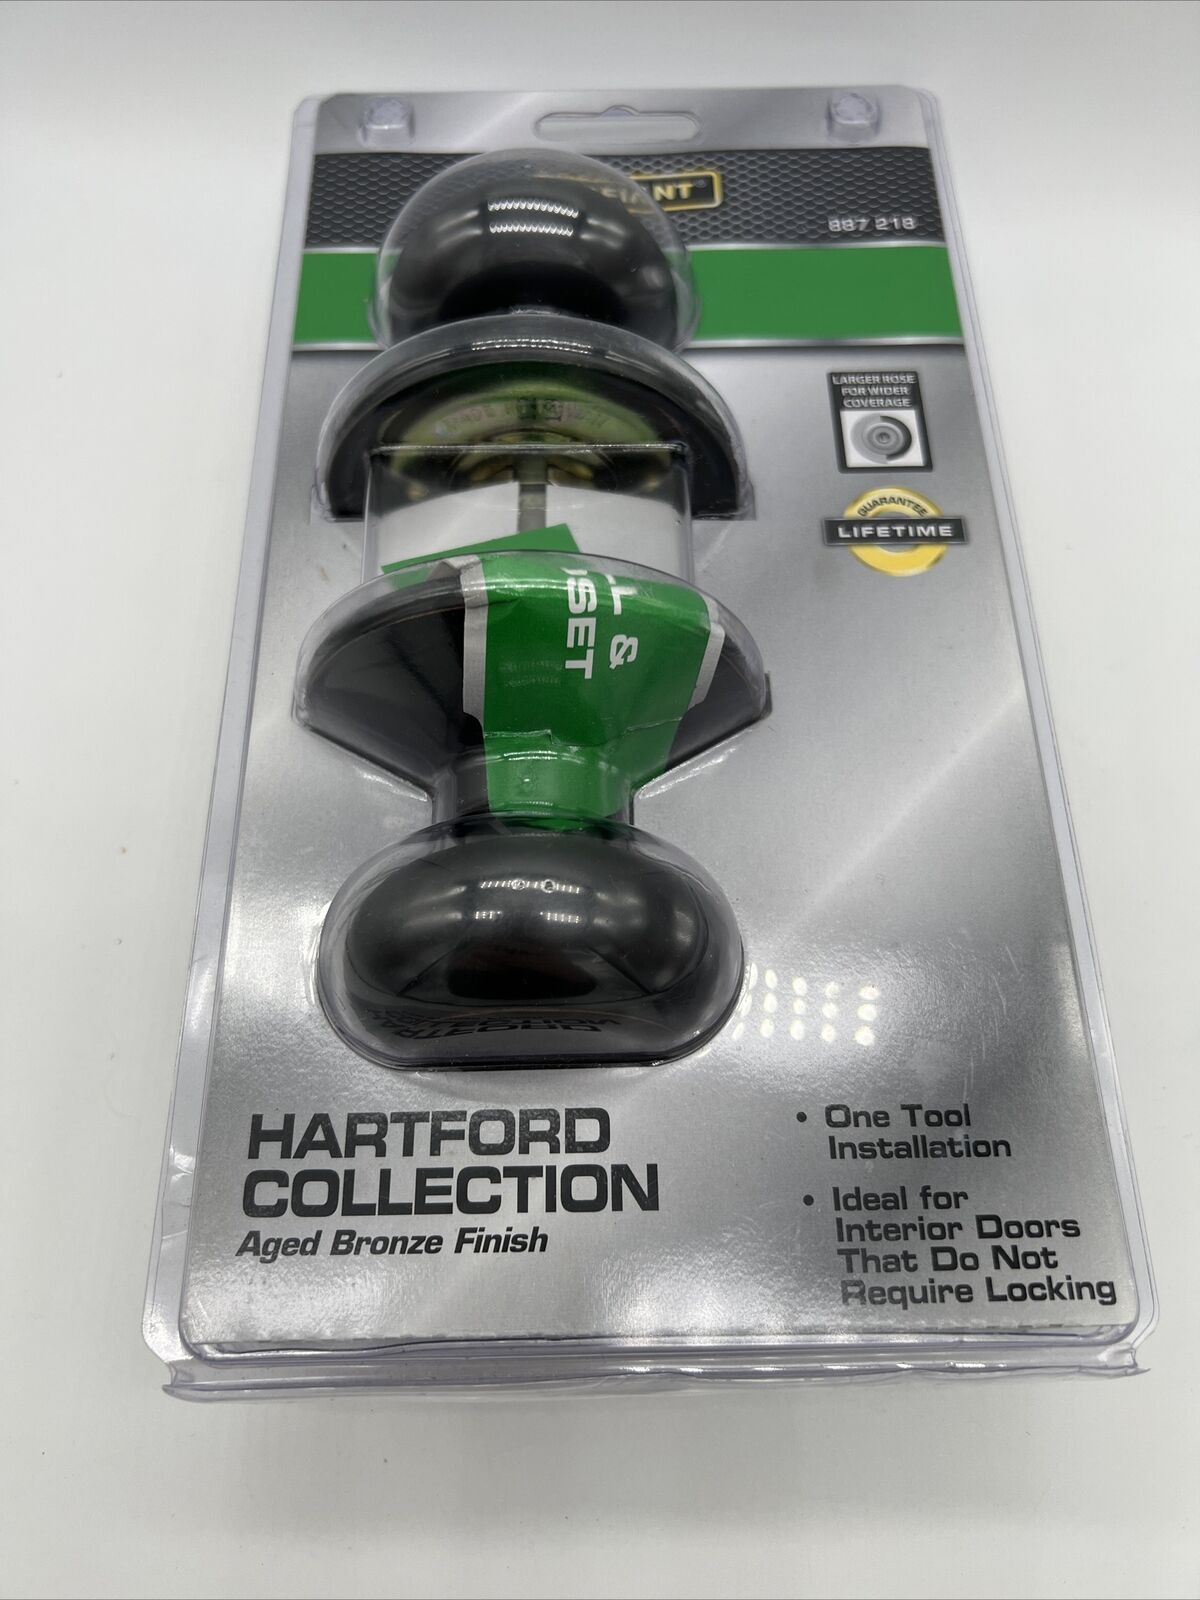 Defiant Hartford Collection Hall And Closet Aged Bronze Finish Door Knobs Damaged Box